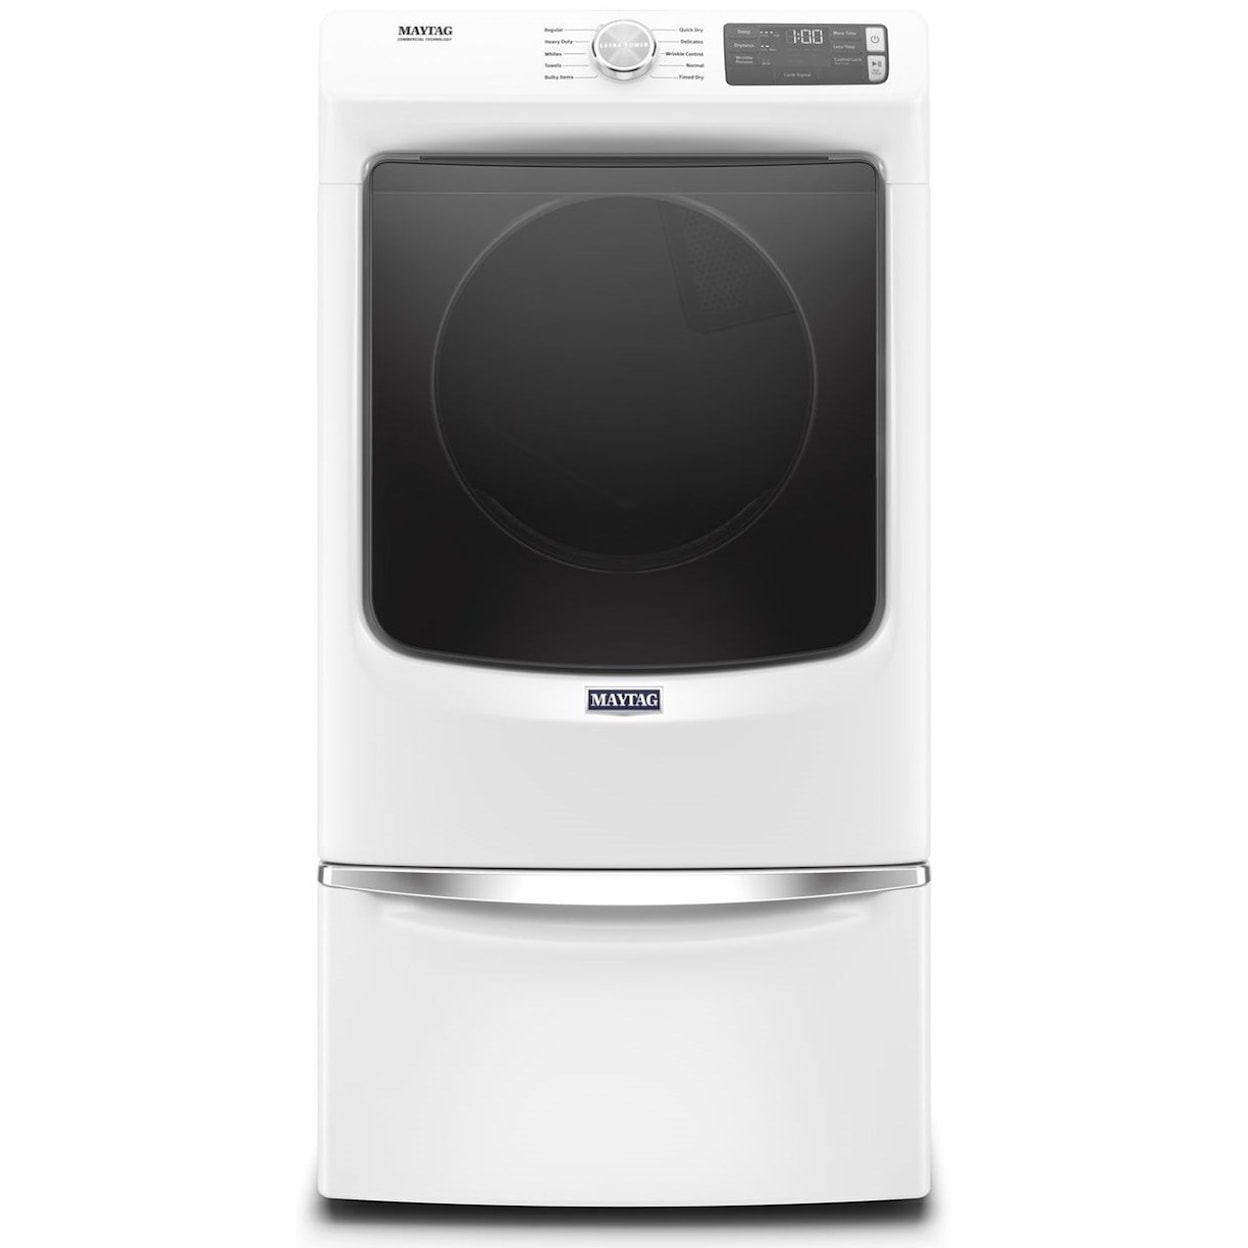 Maytag Front Load Gas Dryer 7.3 Cu. Ft. Front Load Gas Dryer